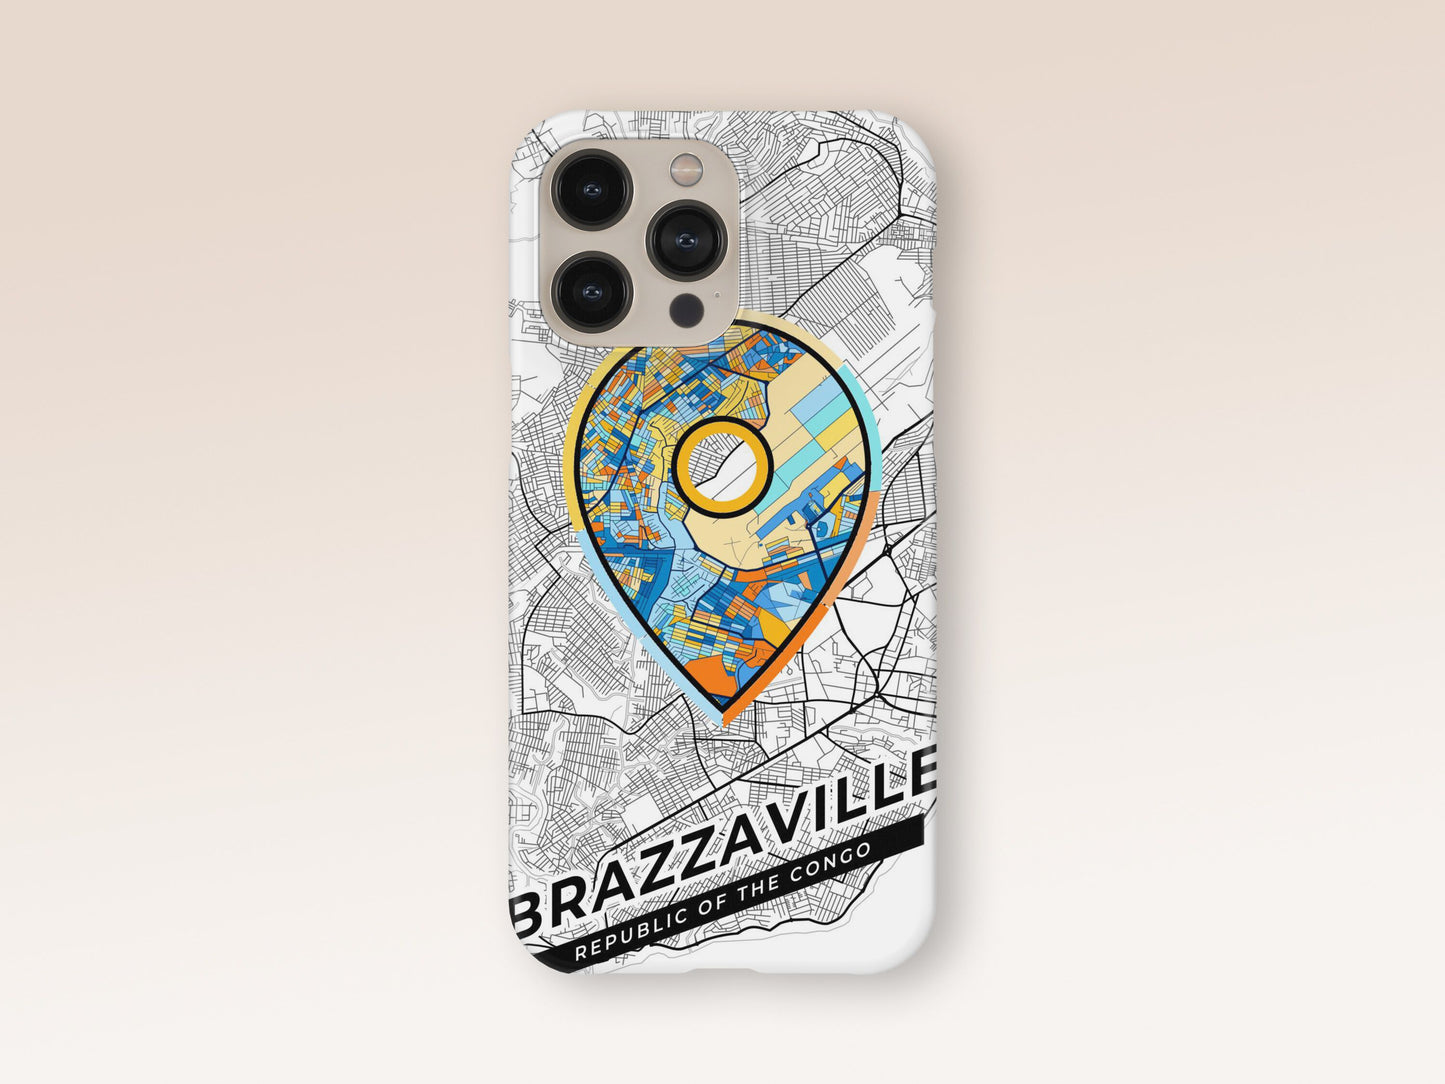 Brazzaville Republic Of The Congo slim phone case with colorful icon. Birthday, wedding or housewarming gift. Couple match cases. 1